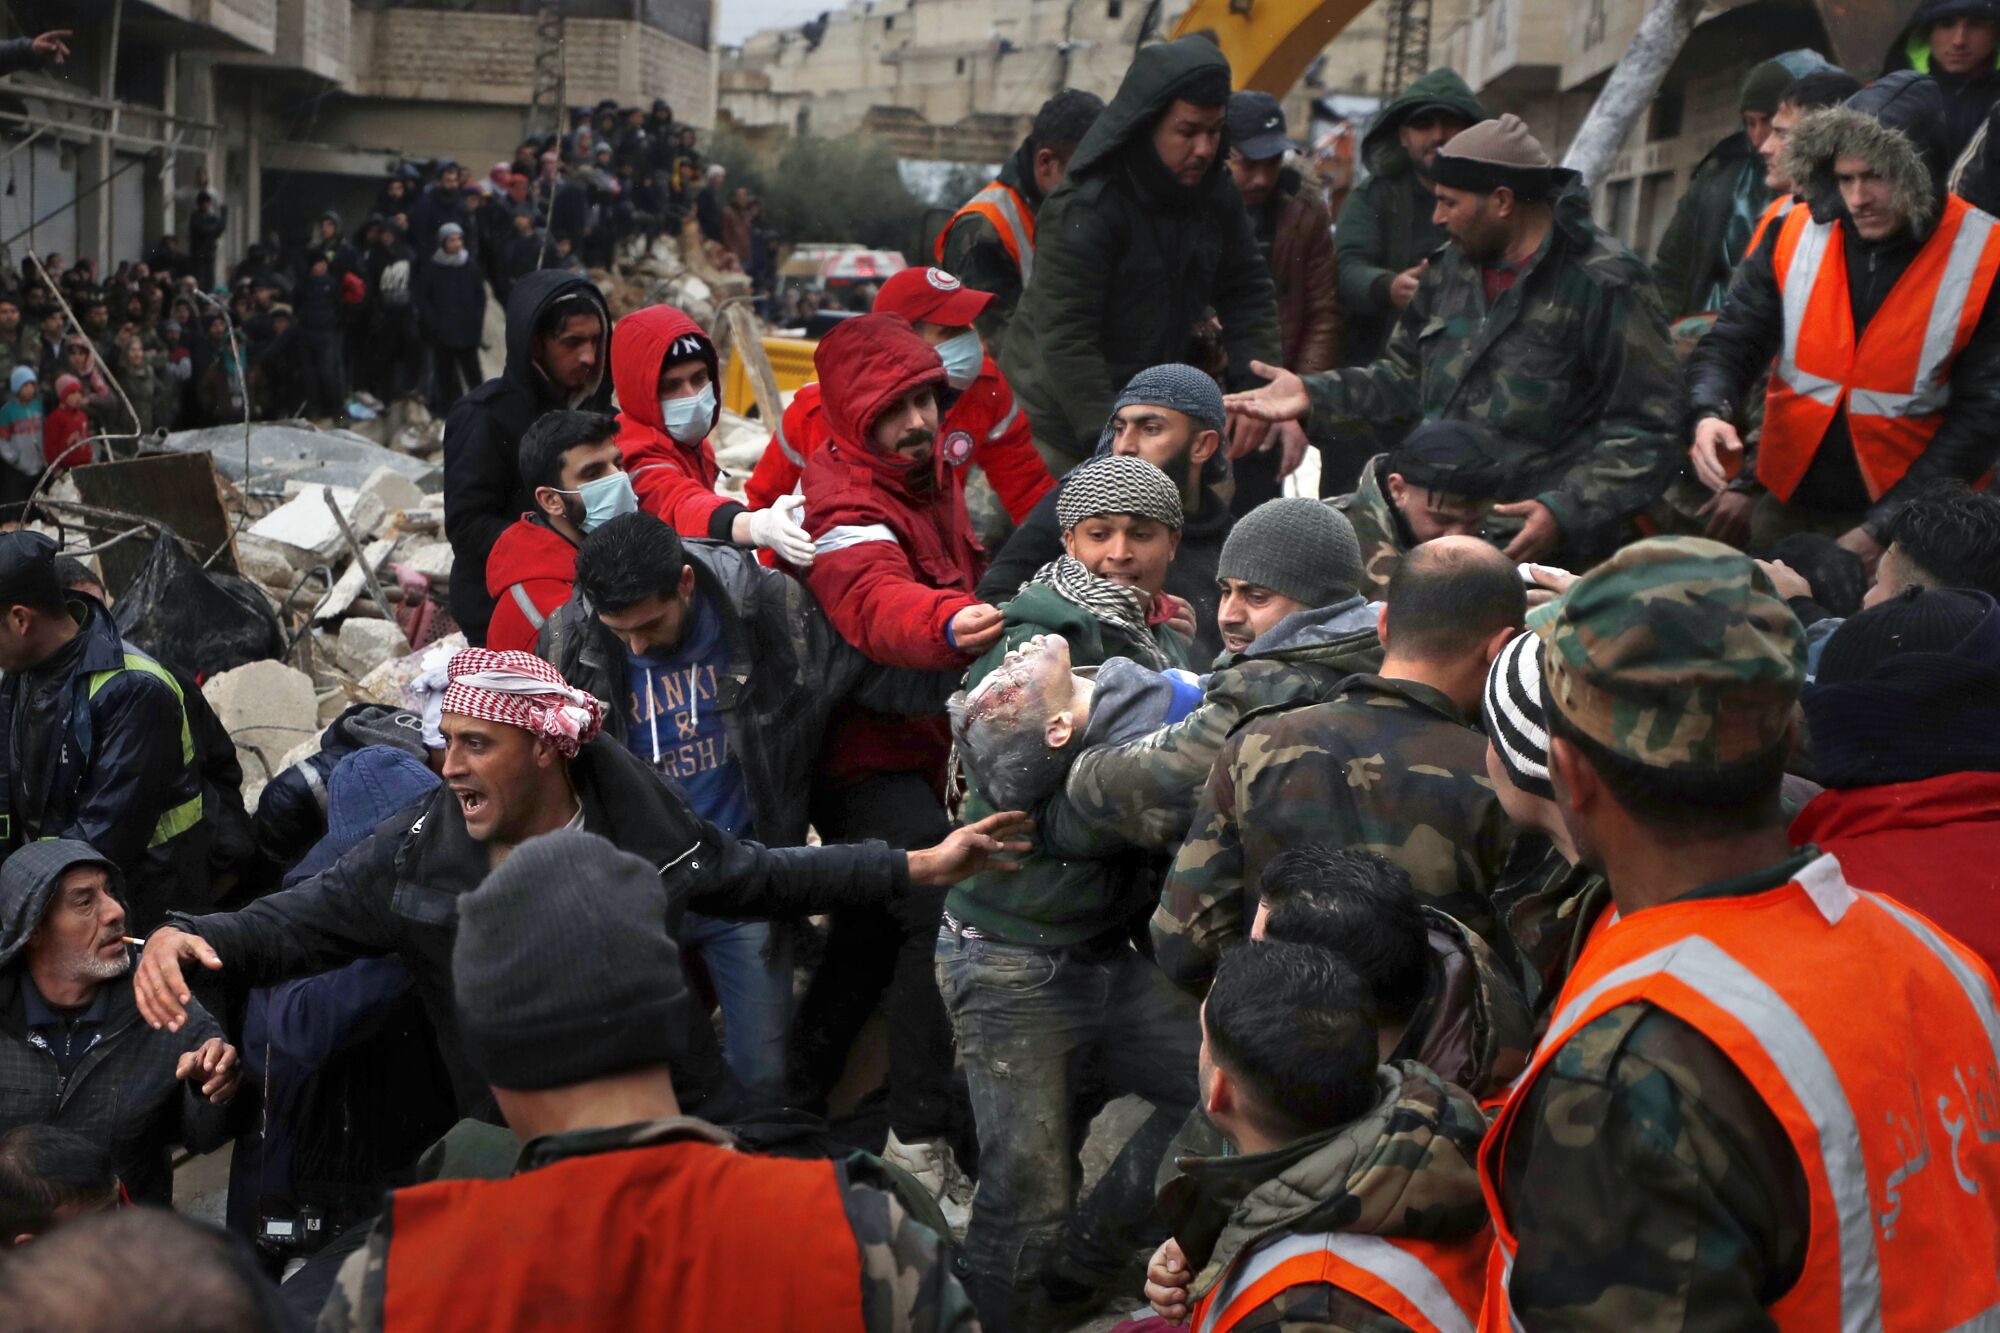 A large group of men and security forces help carry a young boy.